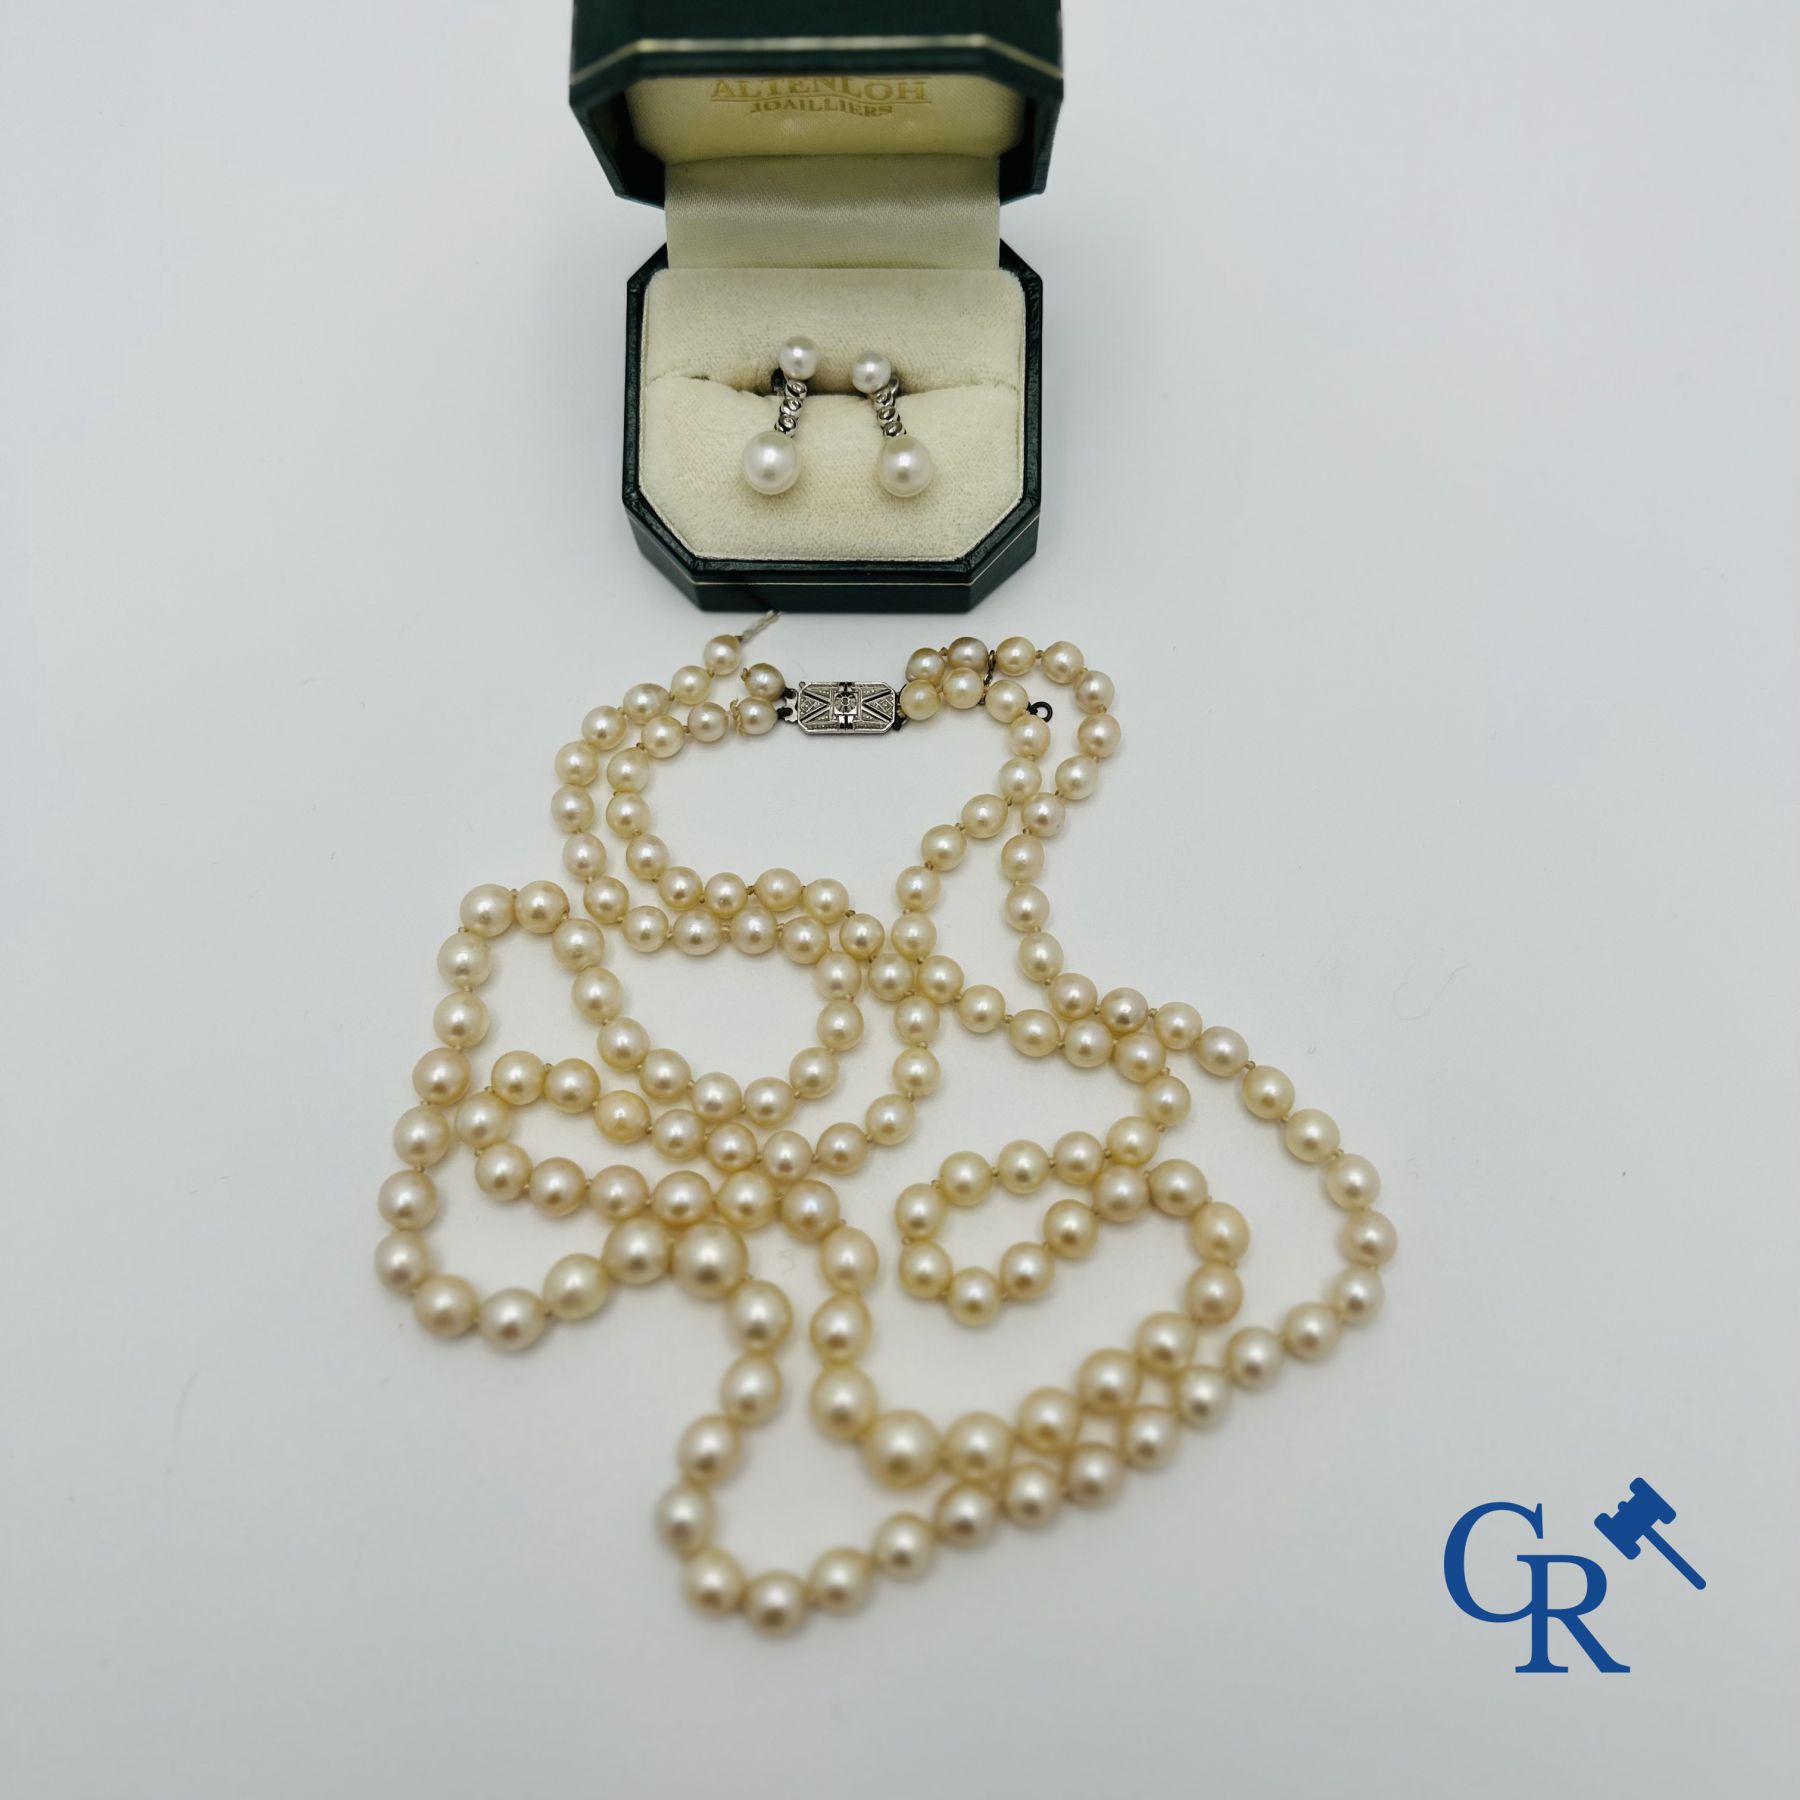 Jewellery: Lot consisting of a pearl necklace with gold clasp 18K and a pair of earrings in white gold 18K.